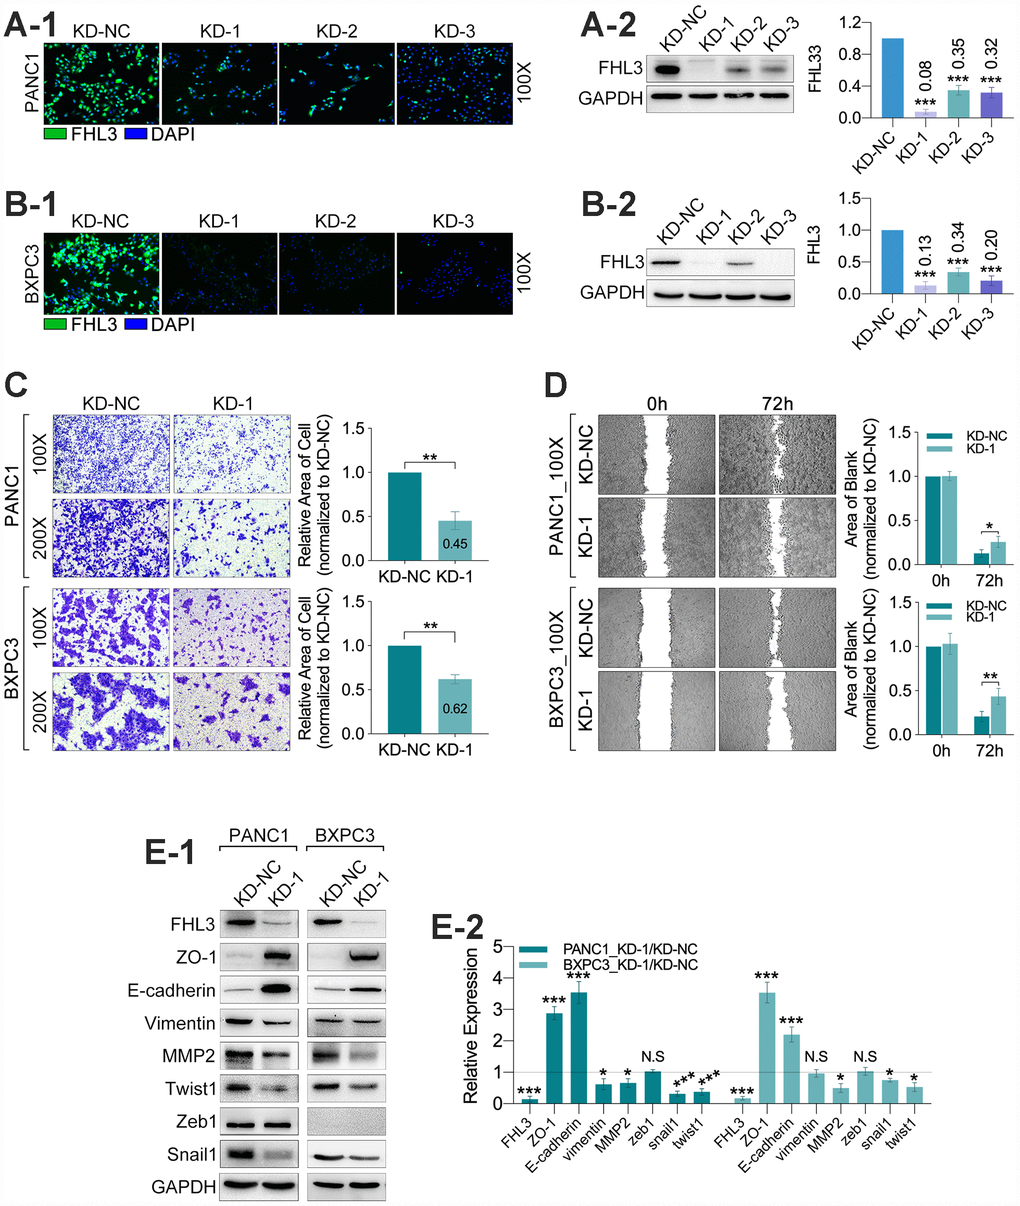 FHL3 knockdown restrained migration and reversed EMT phenotype in pancreatic cancer cells. (A1 and B1) IF assay of FHL3 in PANC1